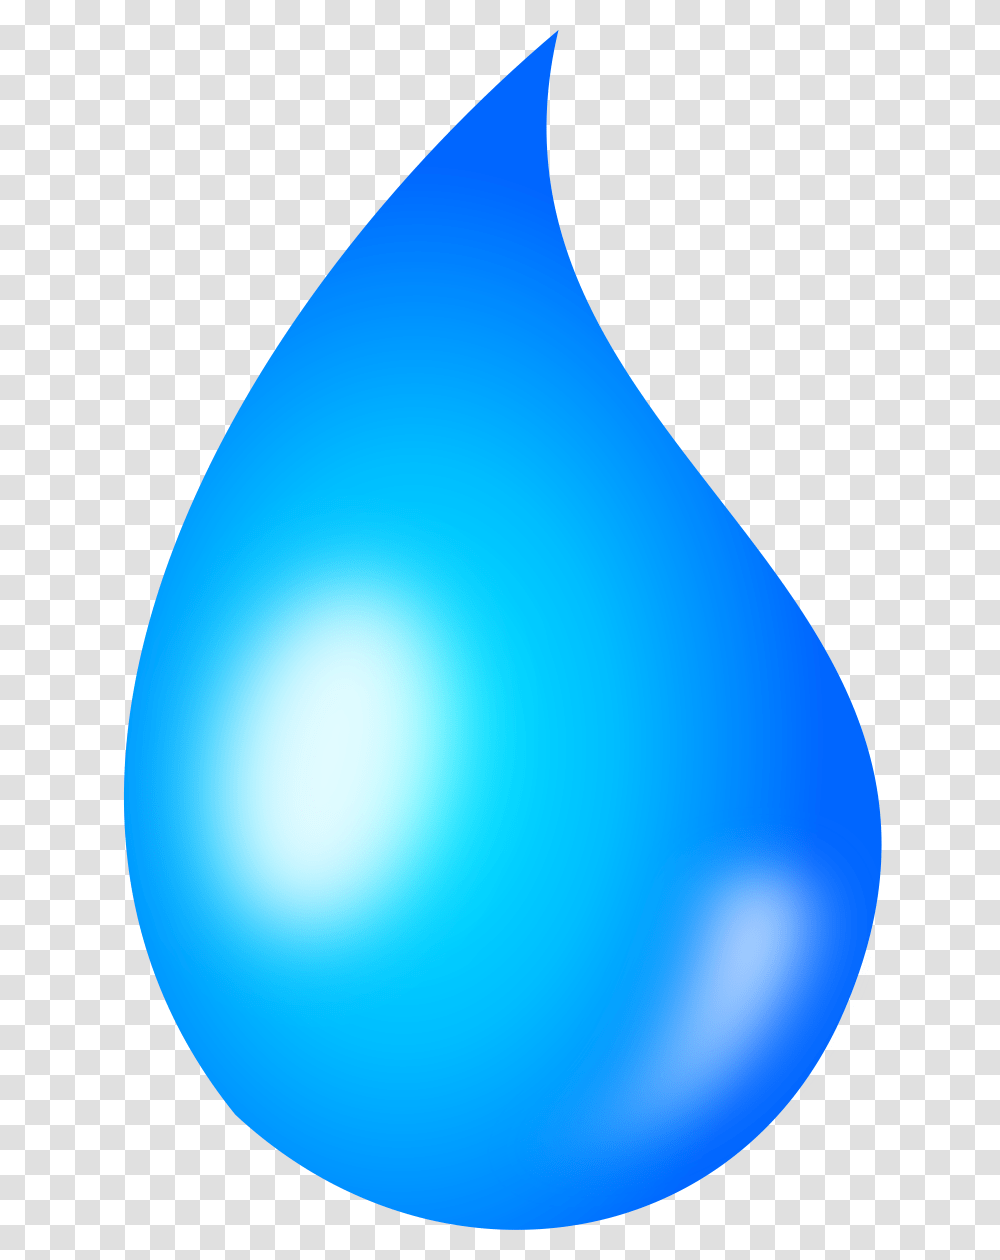 Water Droplets Clipart Water Power, Balloon, Plant Transparent Png